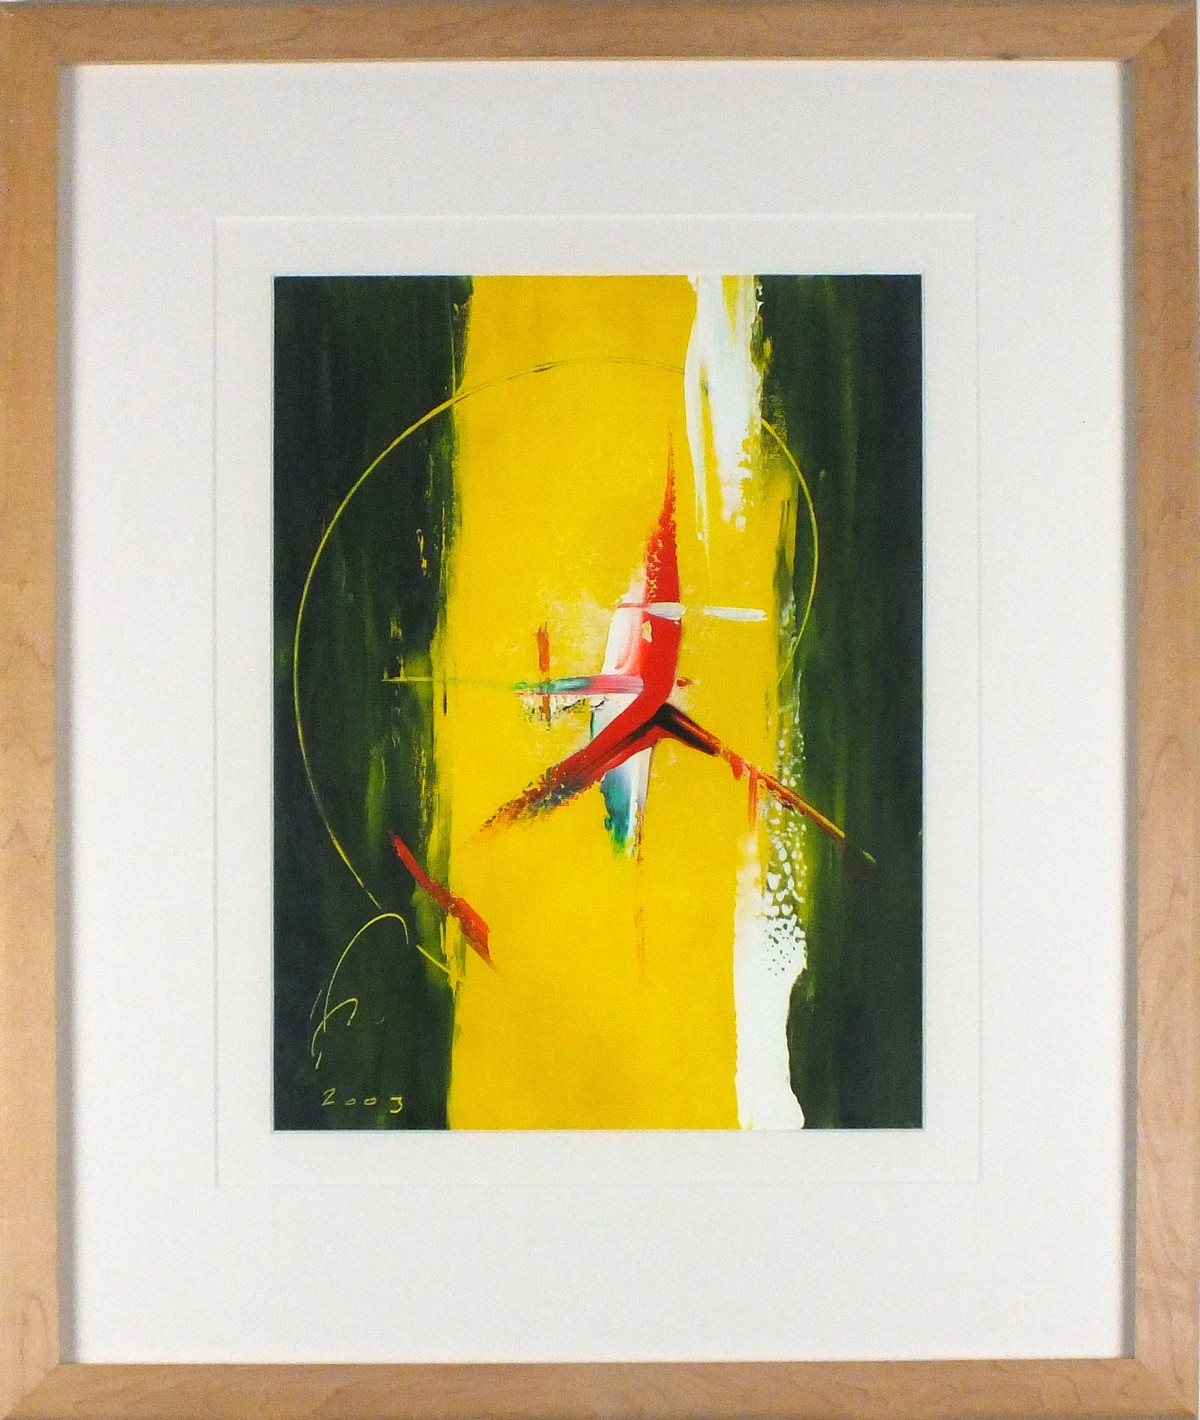 R FEARNE (British 20th Century) Fusion II - abstract, Oil on paper, Signed and dated 2003 lower - Image 2 of 2